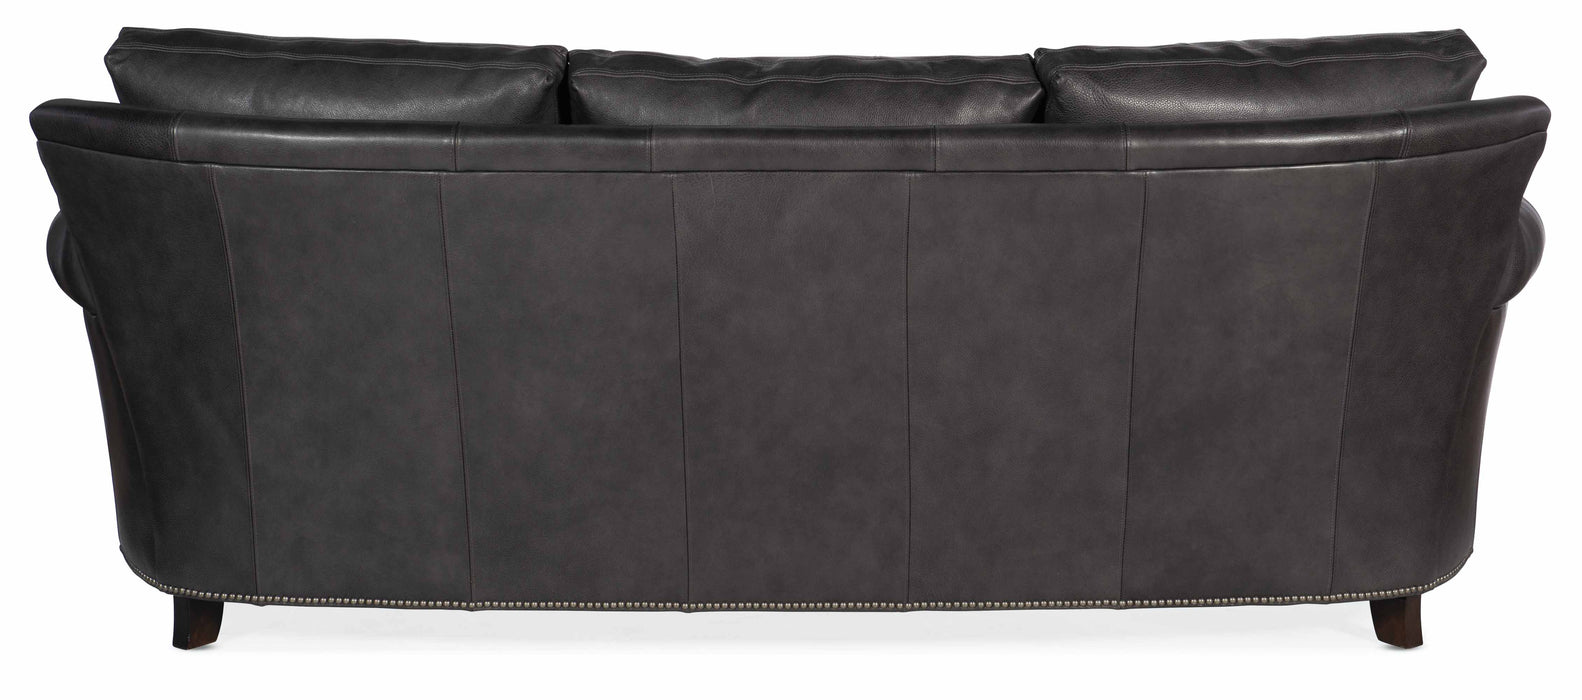 Richardson Leather Sofa in Charcoal Gray